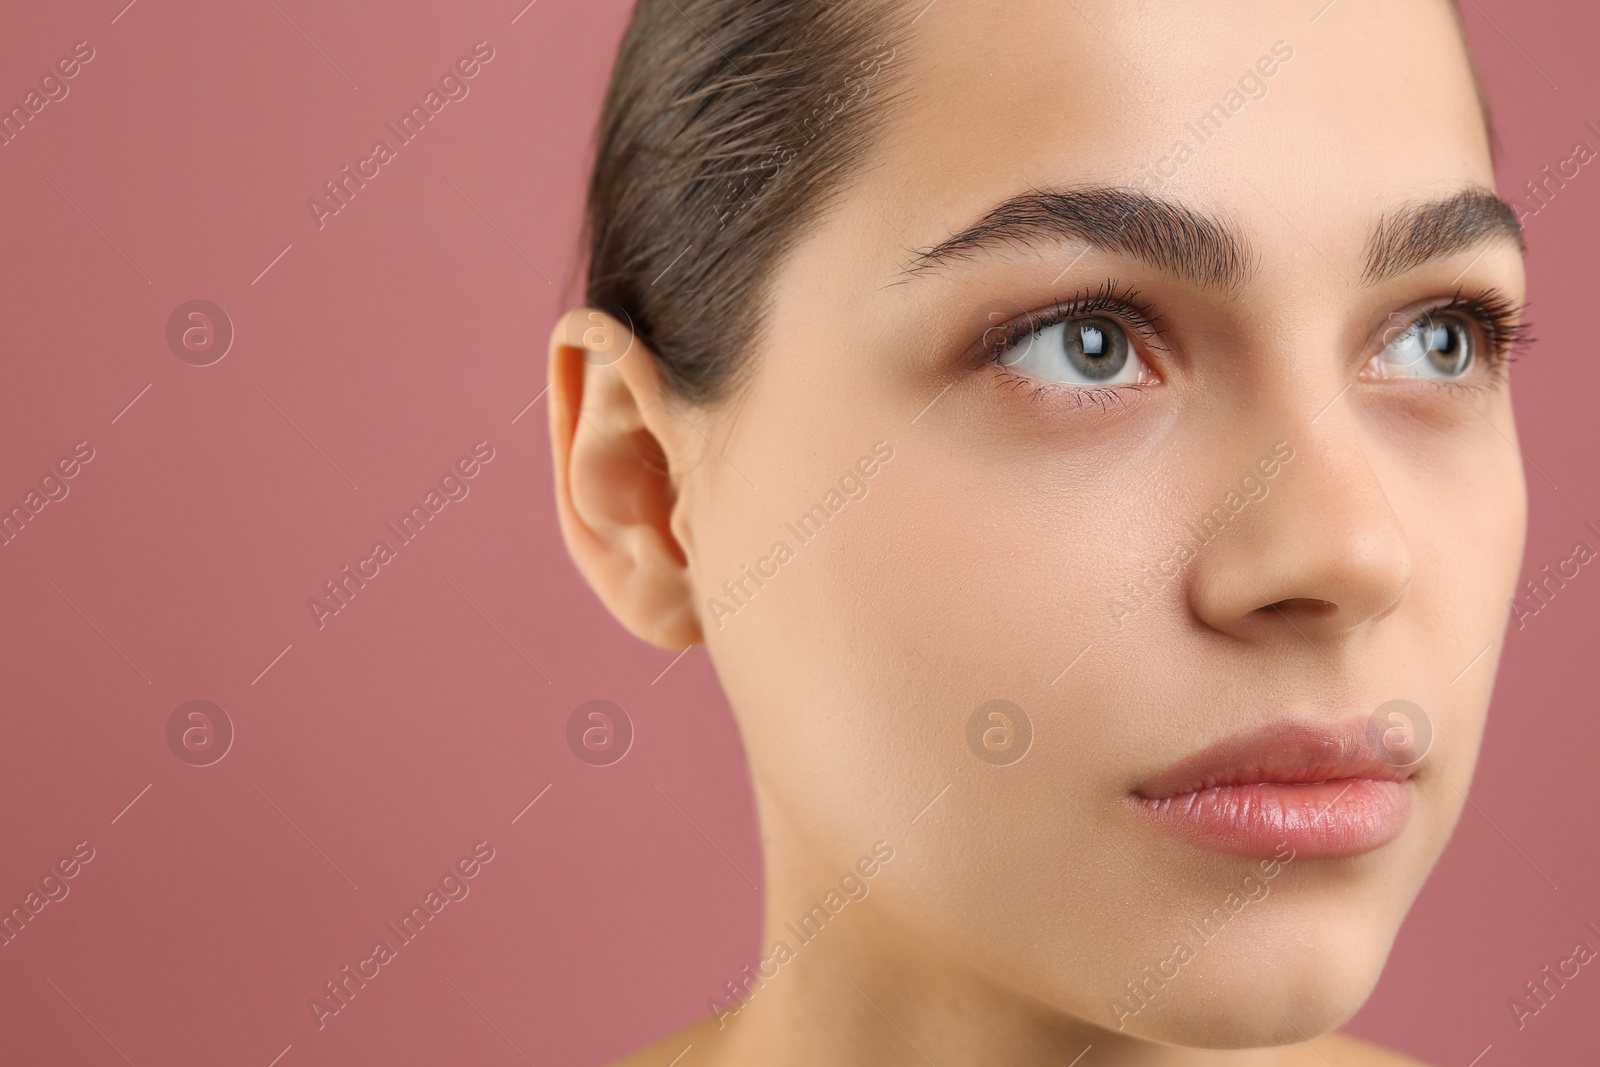 Photo of Young woman with perfect eyebrows on pink background, space for text